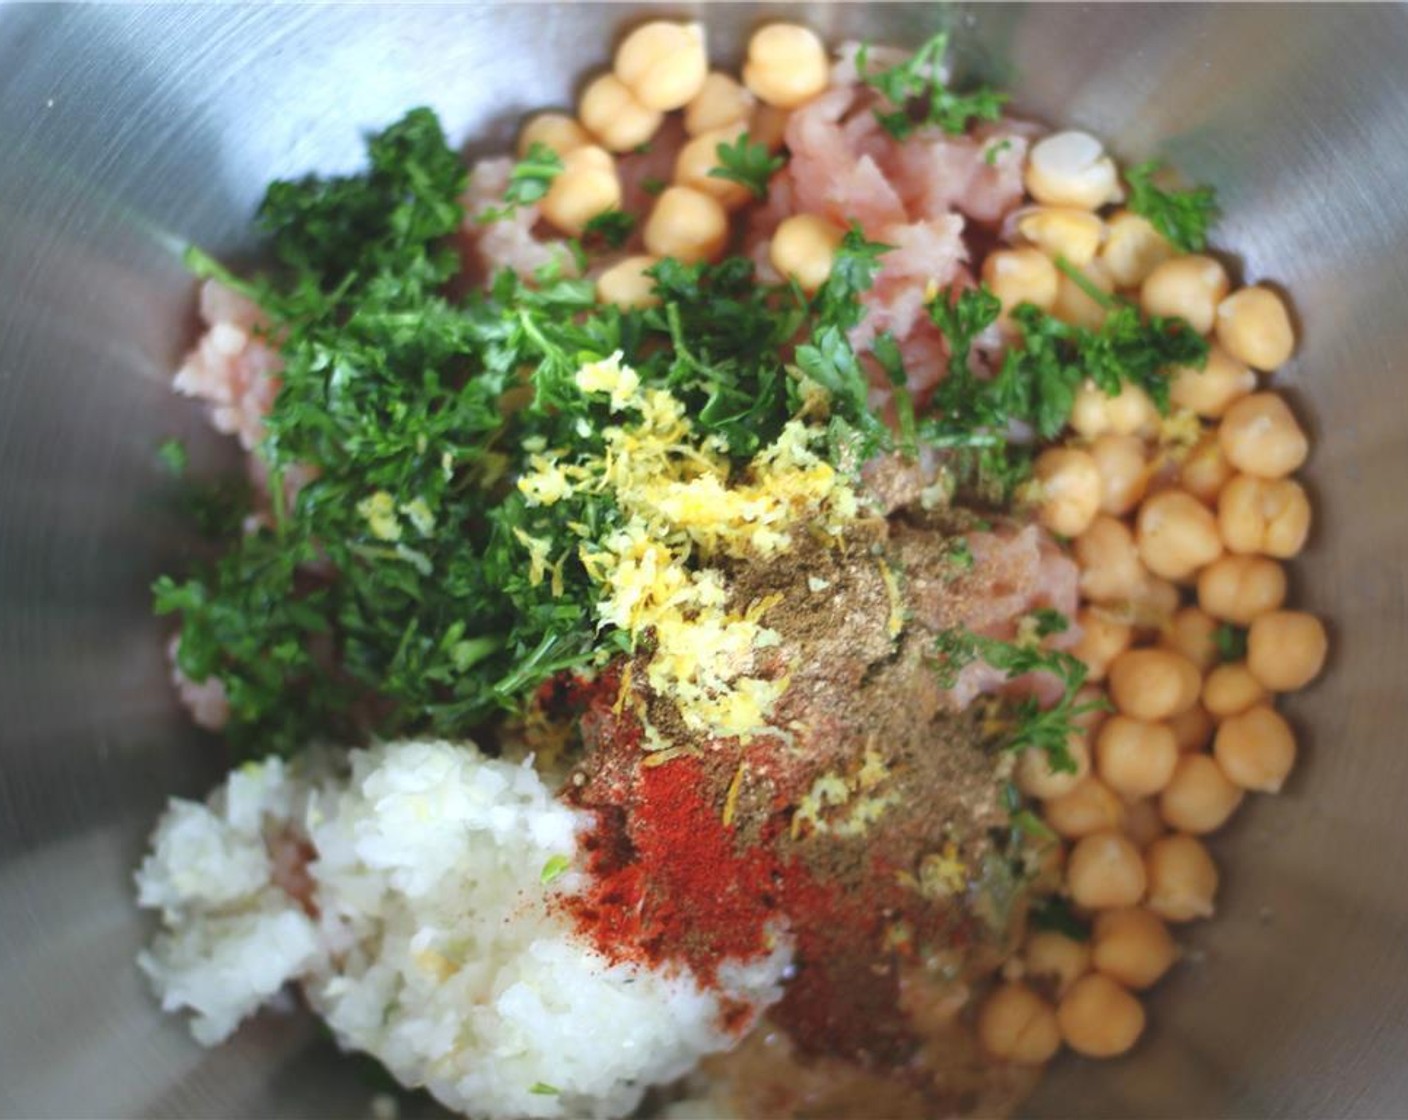 step 1 Mix together the Ground Turkey (1 lb), Canned Chickpeas (1 cup), {@13:}, {@10:}, Fresh Parsley (1/4 cup), {@11:}, Ground Cumin (1 tsp), Ground Coriander (1 tsp), Paprika (1/2 tsp), Ground Ginger (1/2 tsp), Cayenne Pepper (1/4 tsp), Ground Allspice (1/4 tsp), Ground Cinnamon (1/8 tsp), and zest from {@12:}.